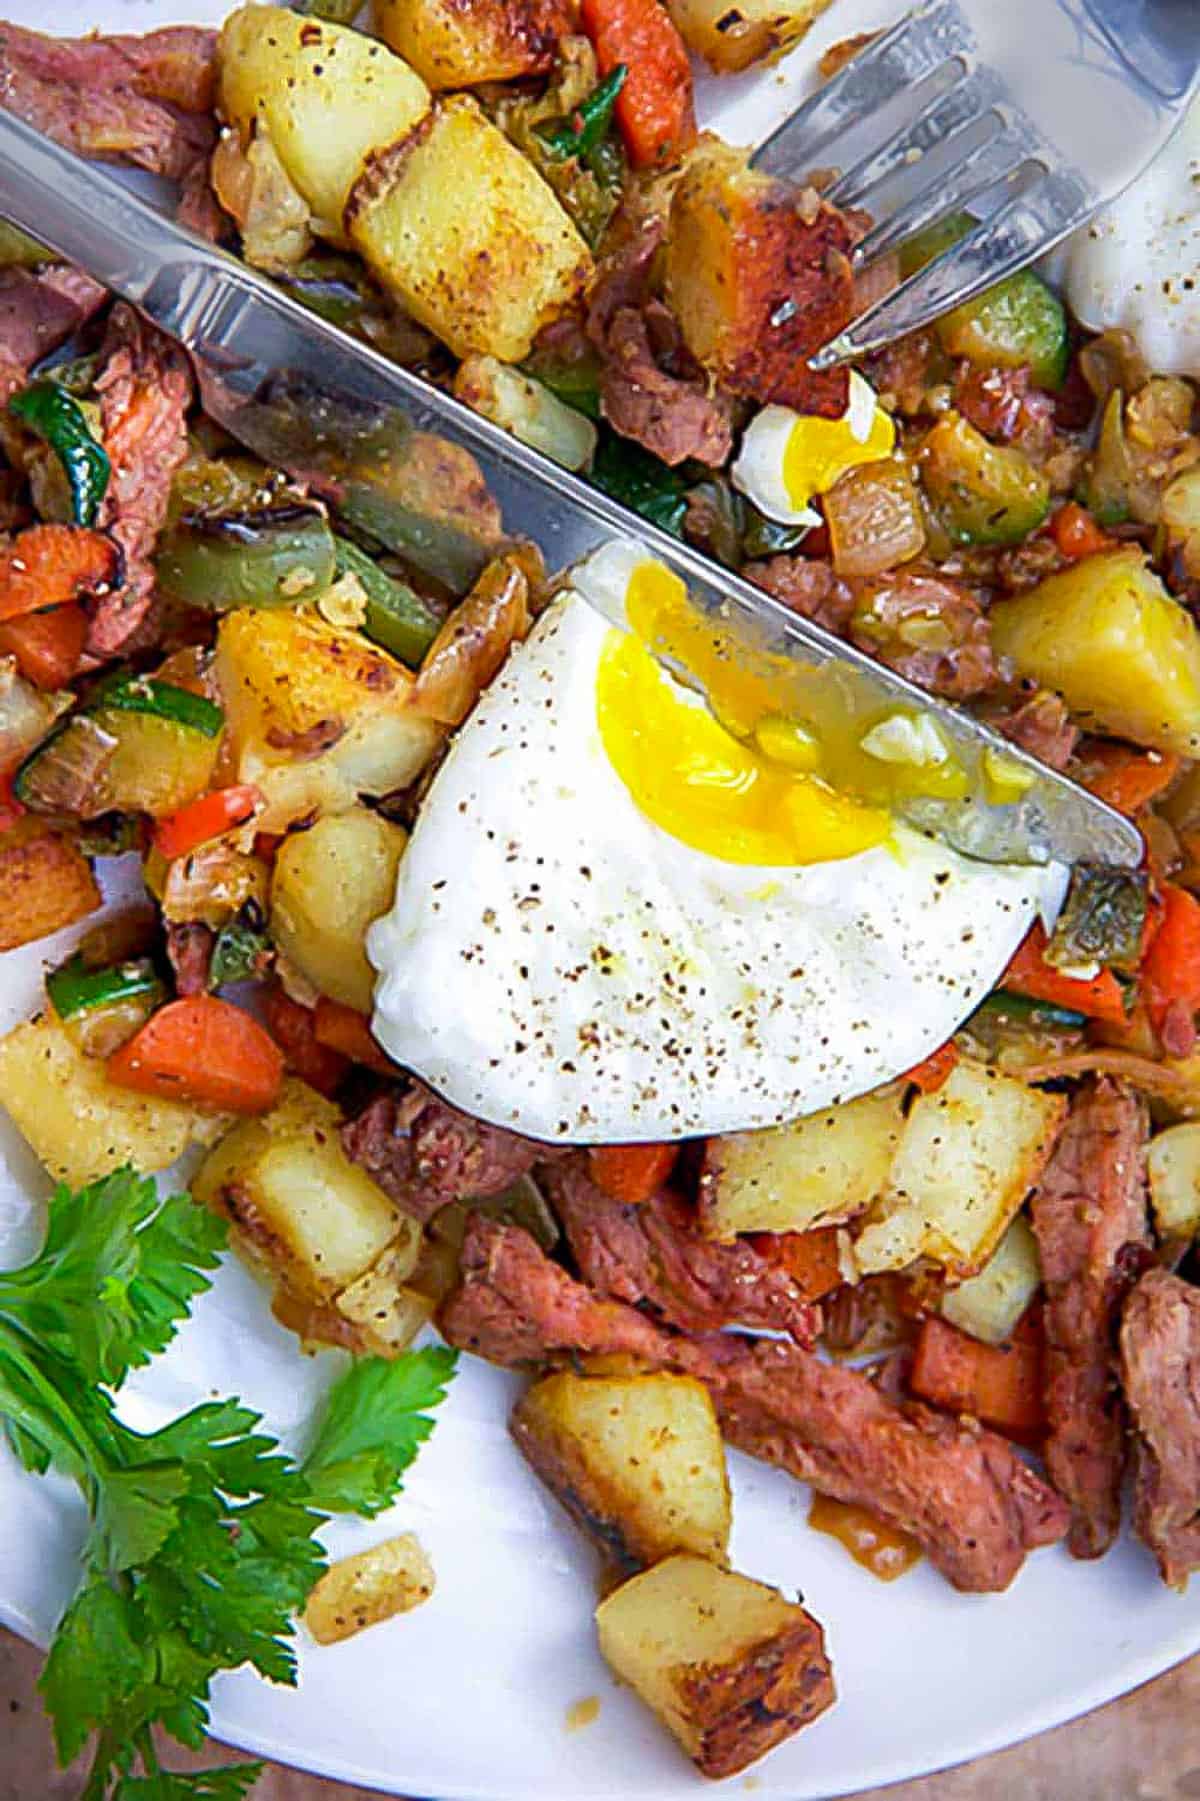 corned beef hash with chopped carrots, peppers and zucchini, topped with half a poached egg being sliced by a knife.